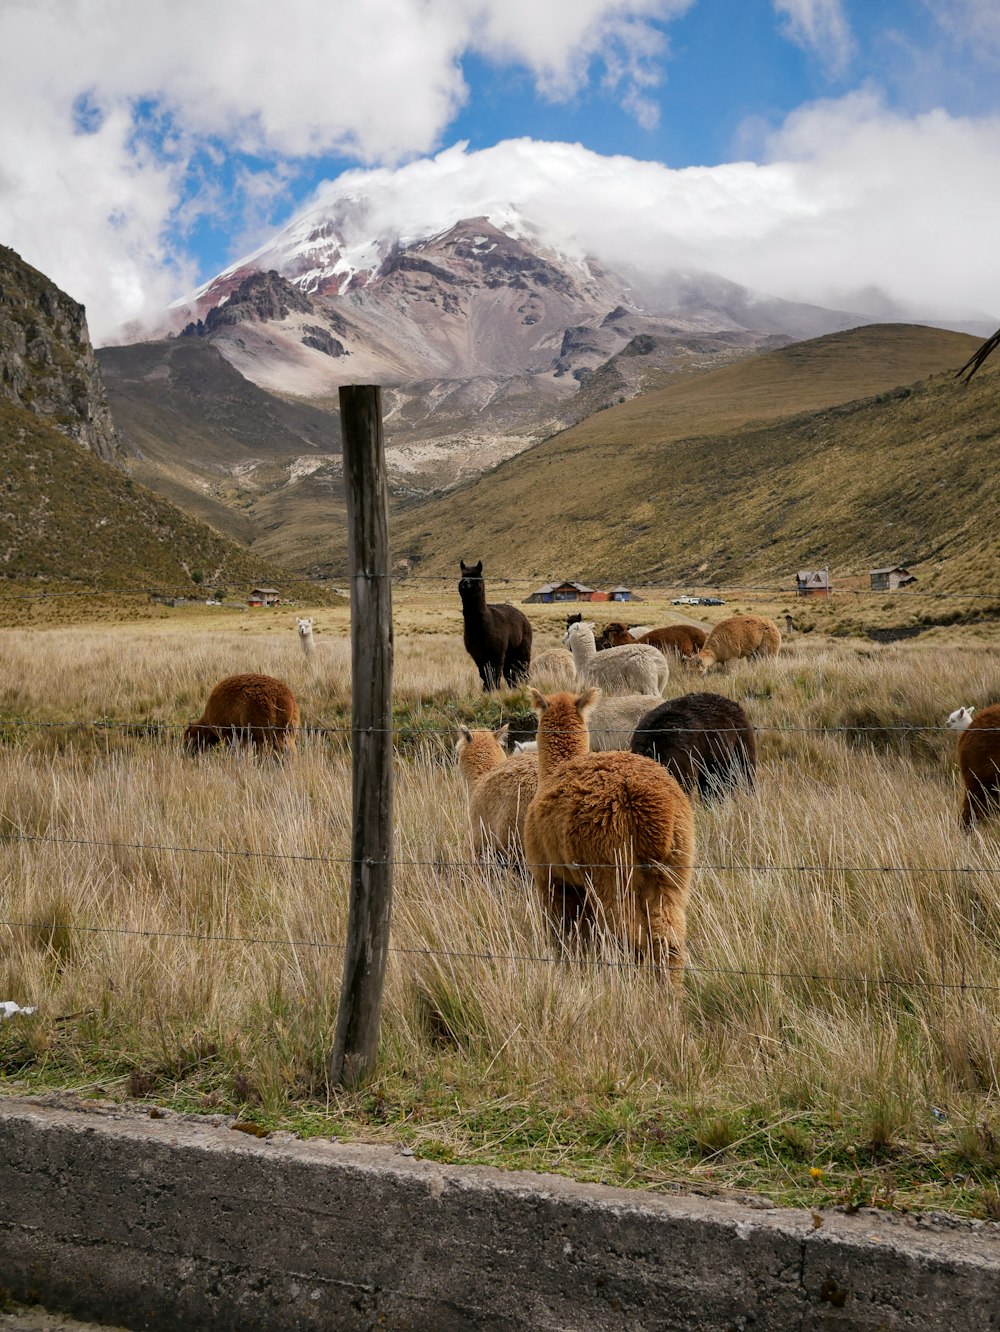 a herd of llamas grazing in a field with a mountain in the background